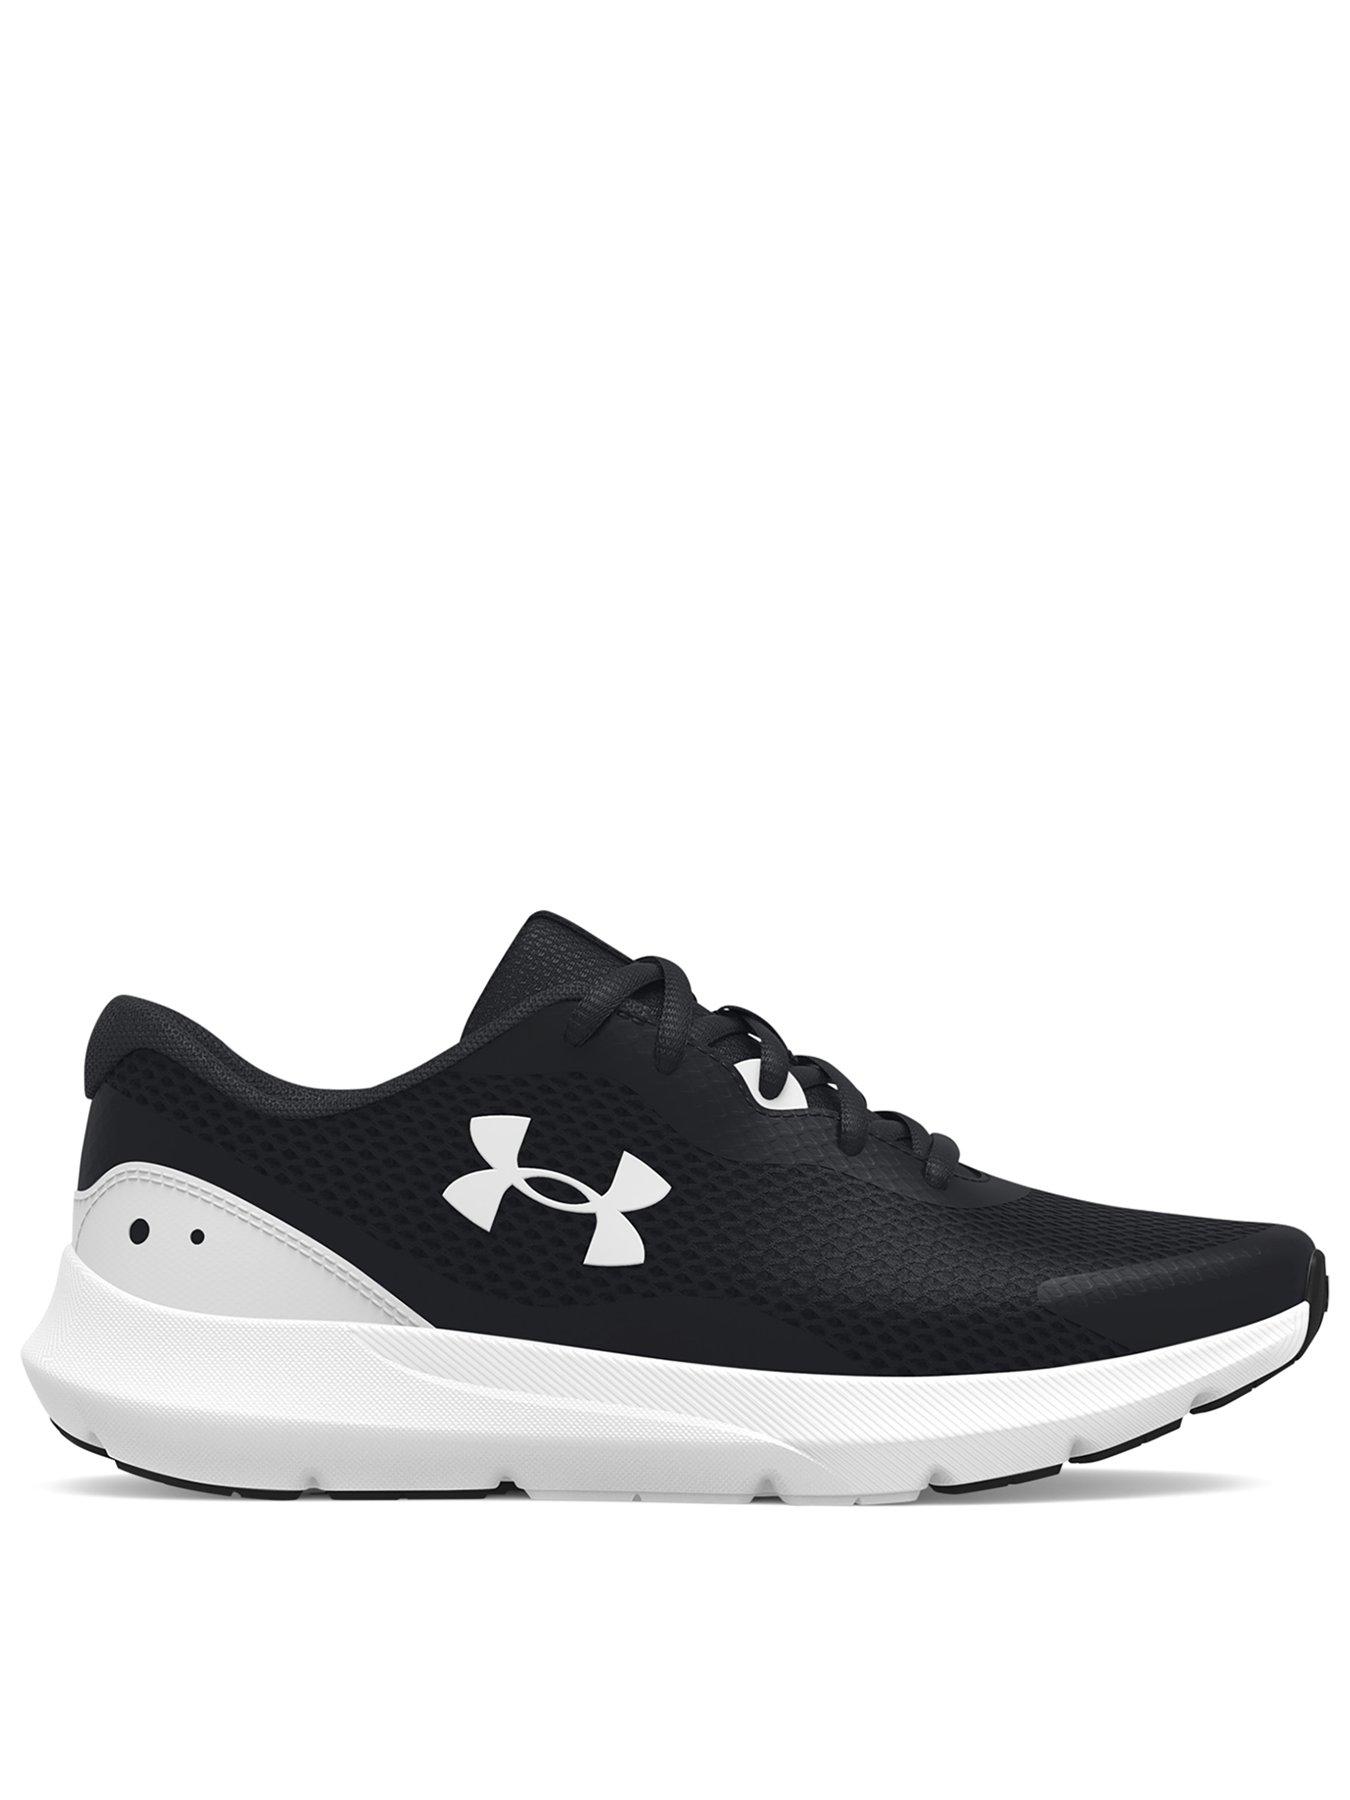 Under Armour Kids Baby Infant Ripple 2.0 Alternate Lace Sneaker 